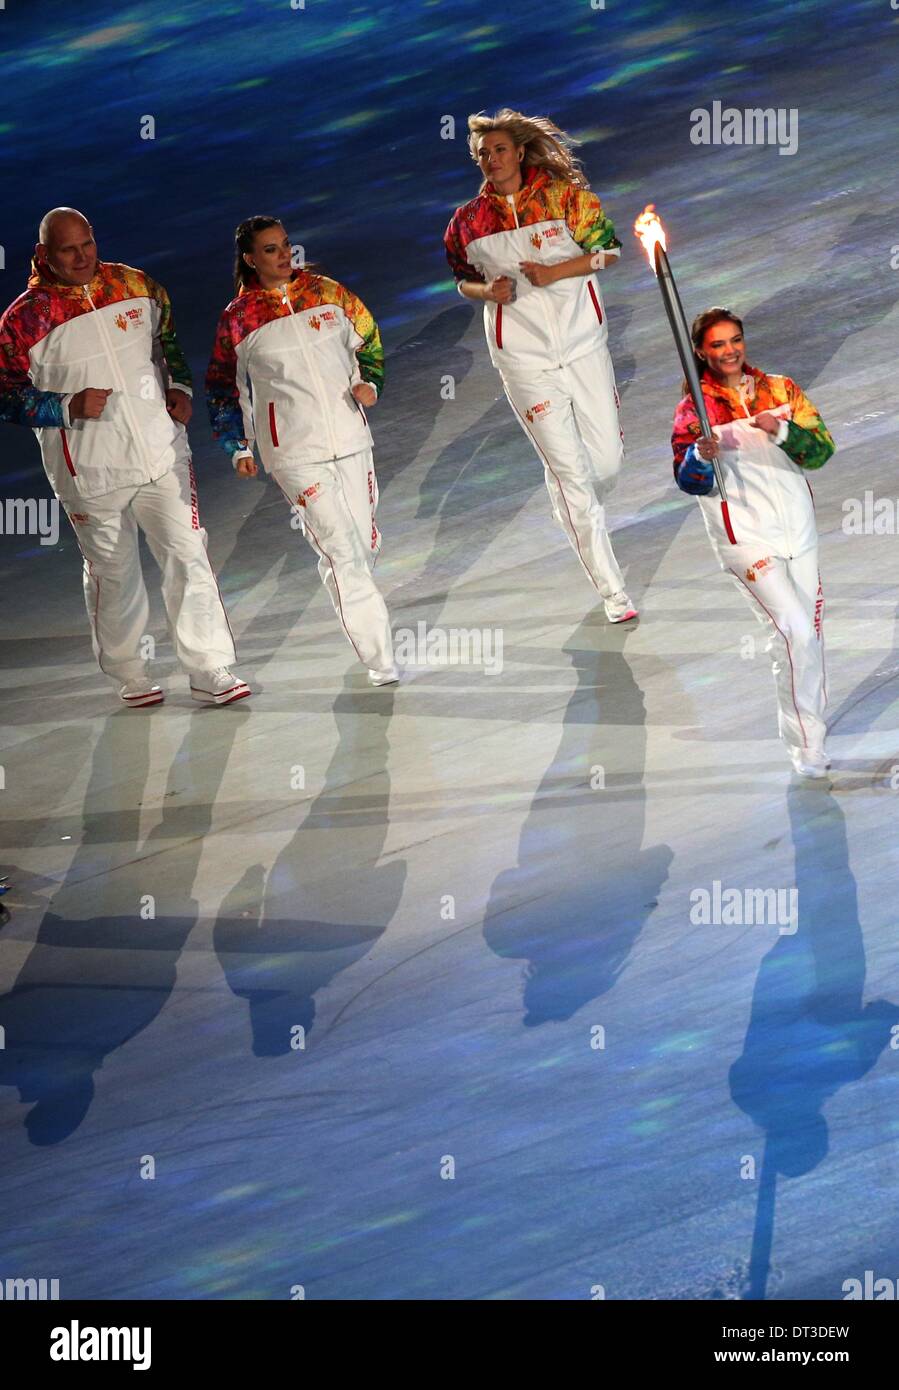 Sochi, Russia. 07 February 2014. Alina Kabaeva (R) of Russia carries the Olympic torch as Alexandr Karelin (L), Russian pole vaulter Yelena Isinbayeva (2-L) and tennis player Maria Sharapova of Russia follow during the Opening Ceremony in Fisht Olympic Stadium at the Sochi 2014 Olympic Games, Sochi, Russia, 07 February 2014. Photo: Christian Charisius/dpa in Fisht Olympic Stadium at the Sochi 2014 Olympic Games, Sochi, Russia, 07 February 2014. Photo: Christian Charisius/dpa/Alamy Live News Stock Photo